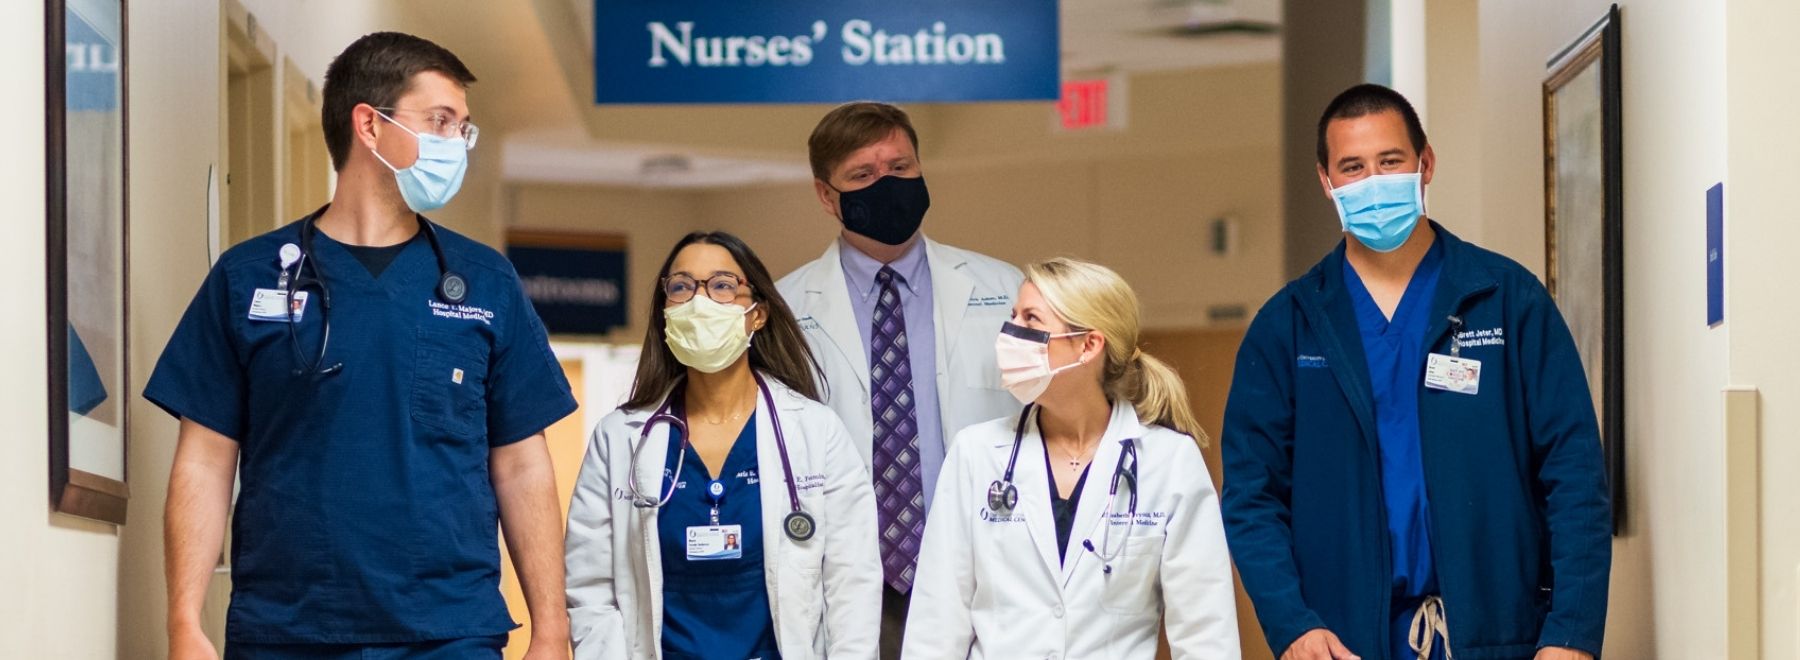 A group of hospital medicine physicians round on a unit